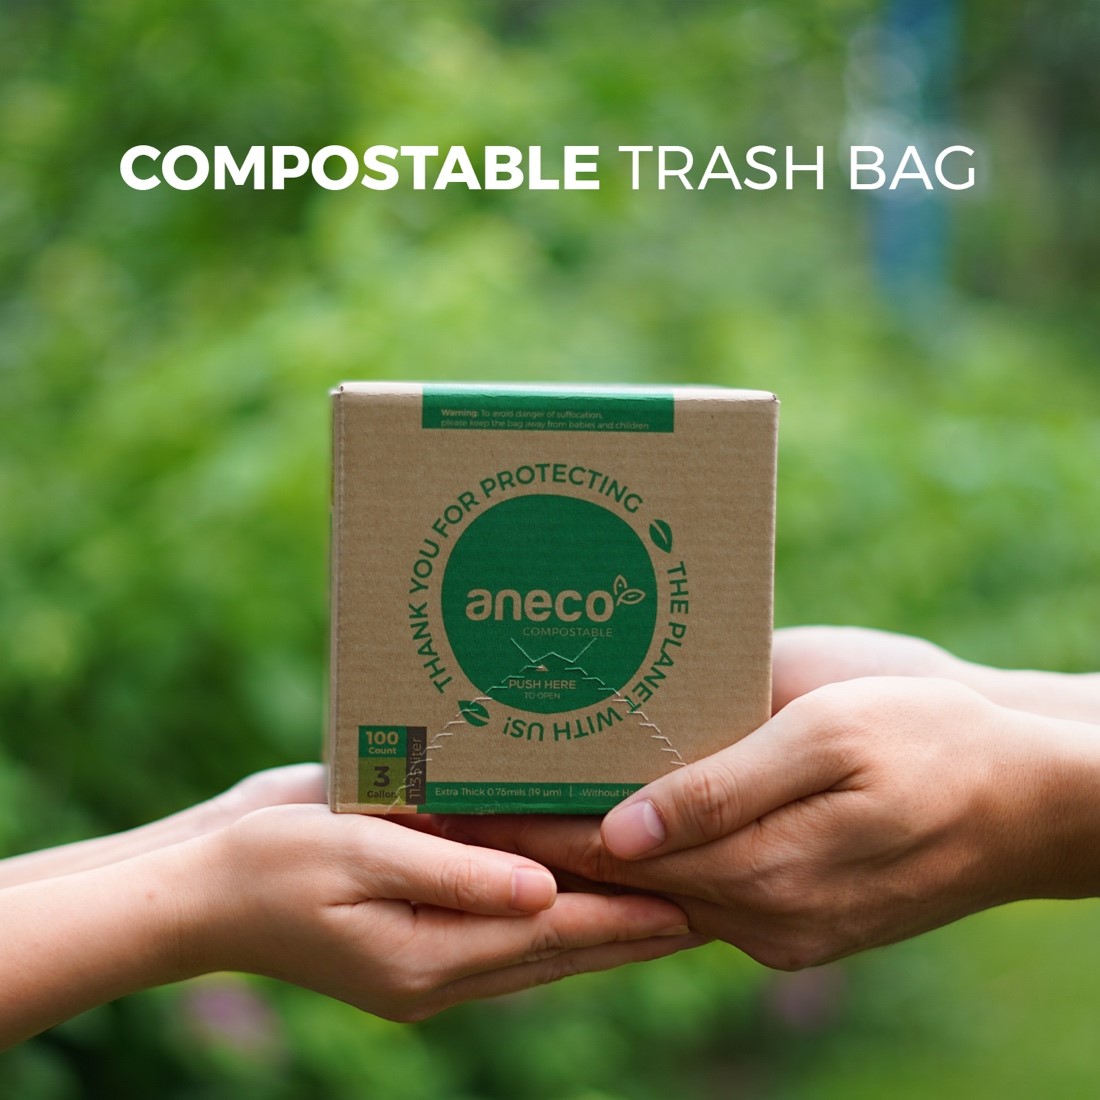 100% compostable products AnEco are now available on Amazon US